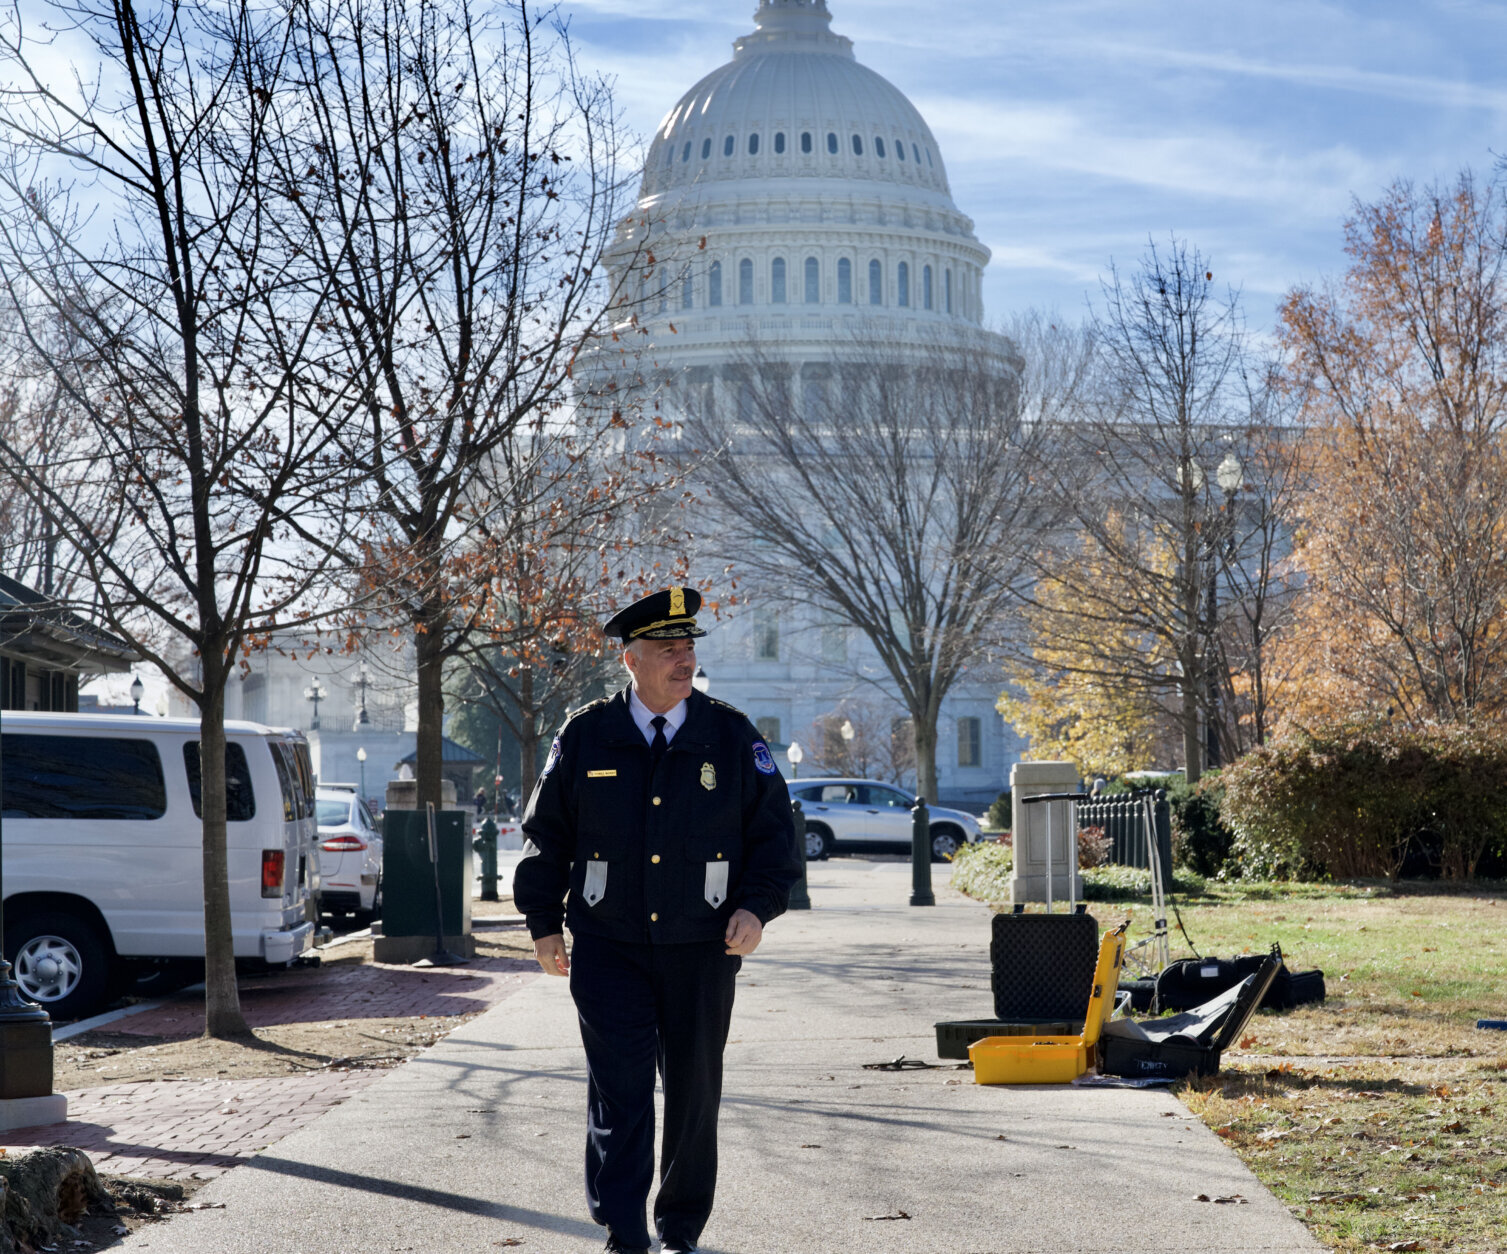 US Capitol Police Chief Tom Manger tells WTOP that the men and women of the US Capitol Police are dedicated to improving the agency, which has been under scrutiny since the January 6th insurrection.